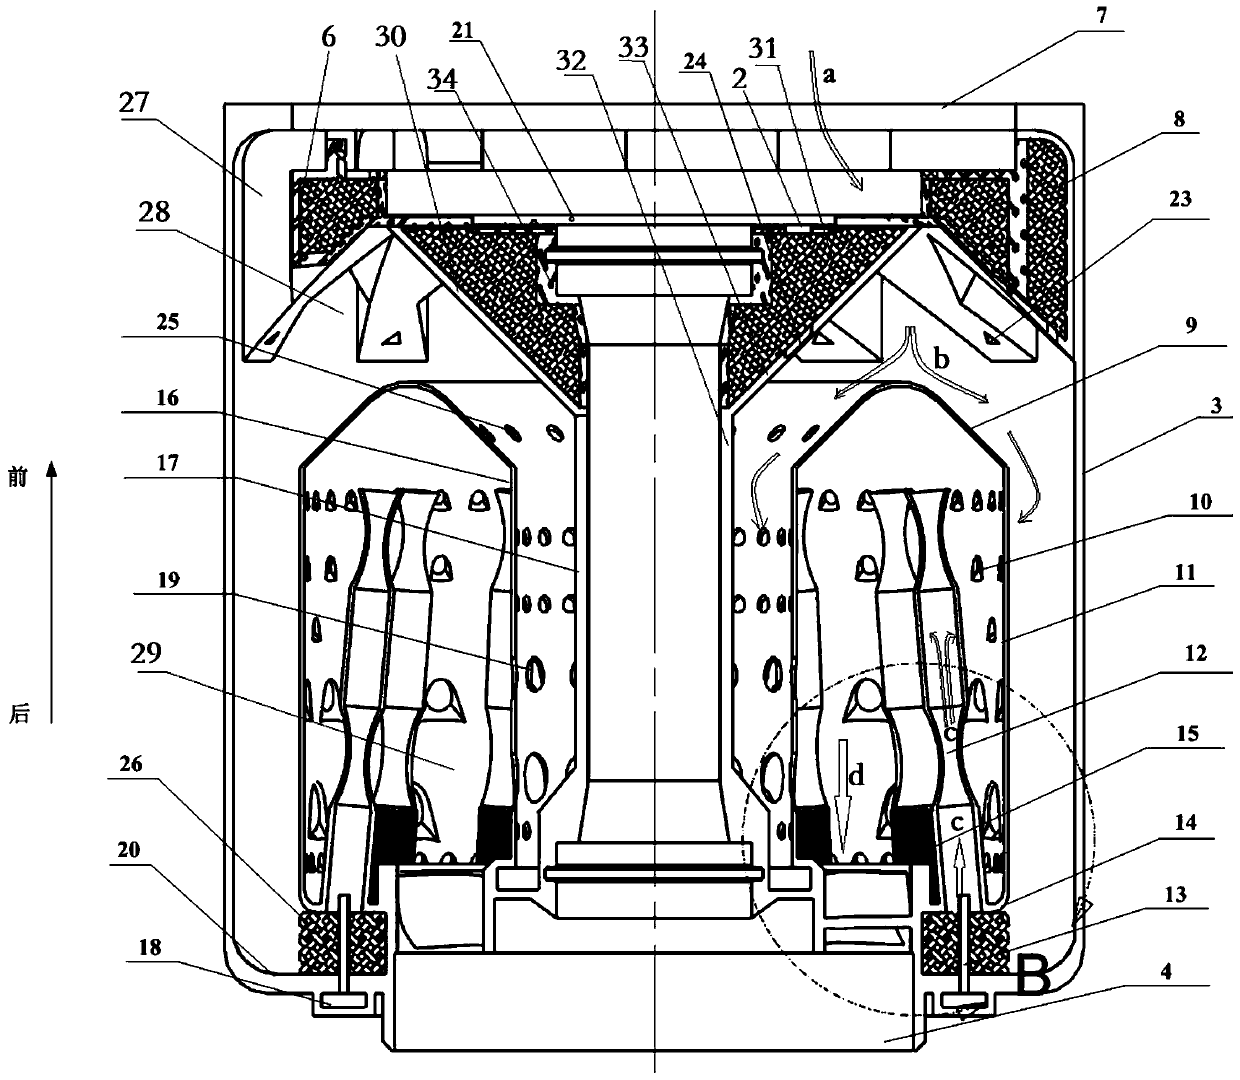 Combustion assembly structure of turbojet engine